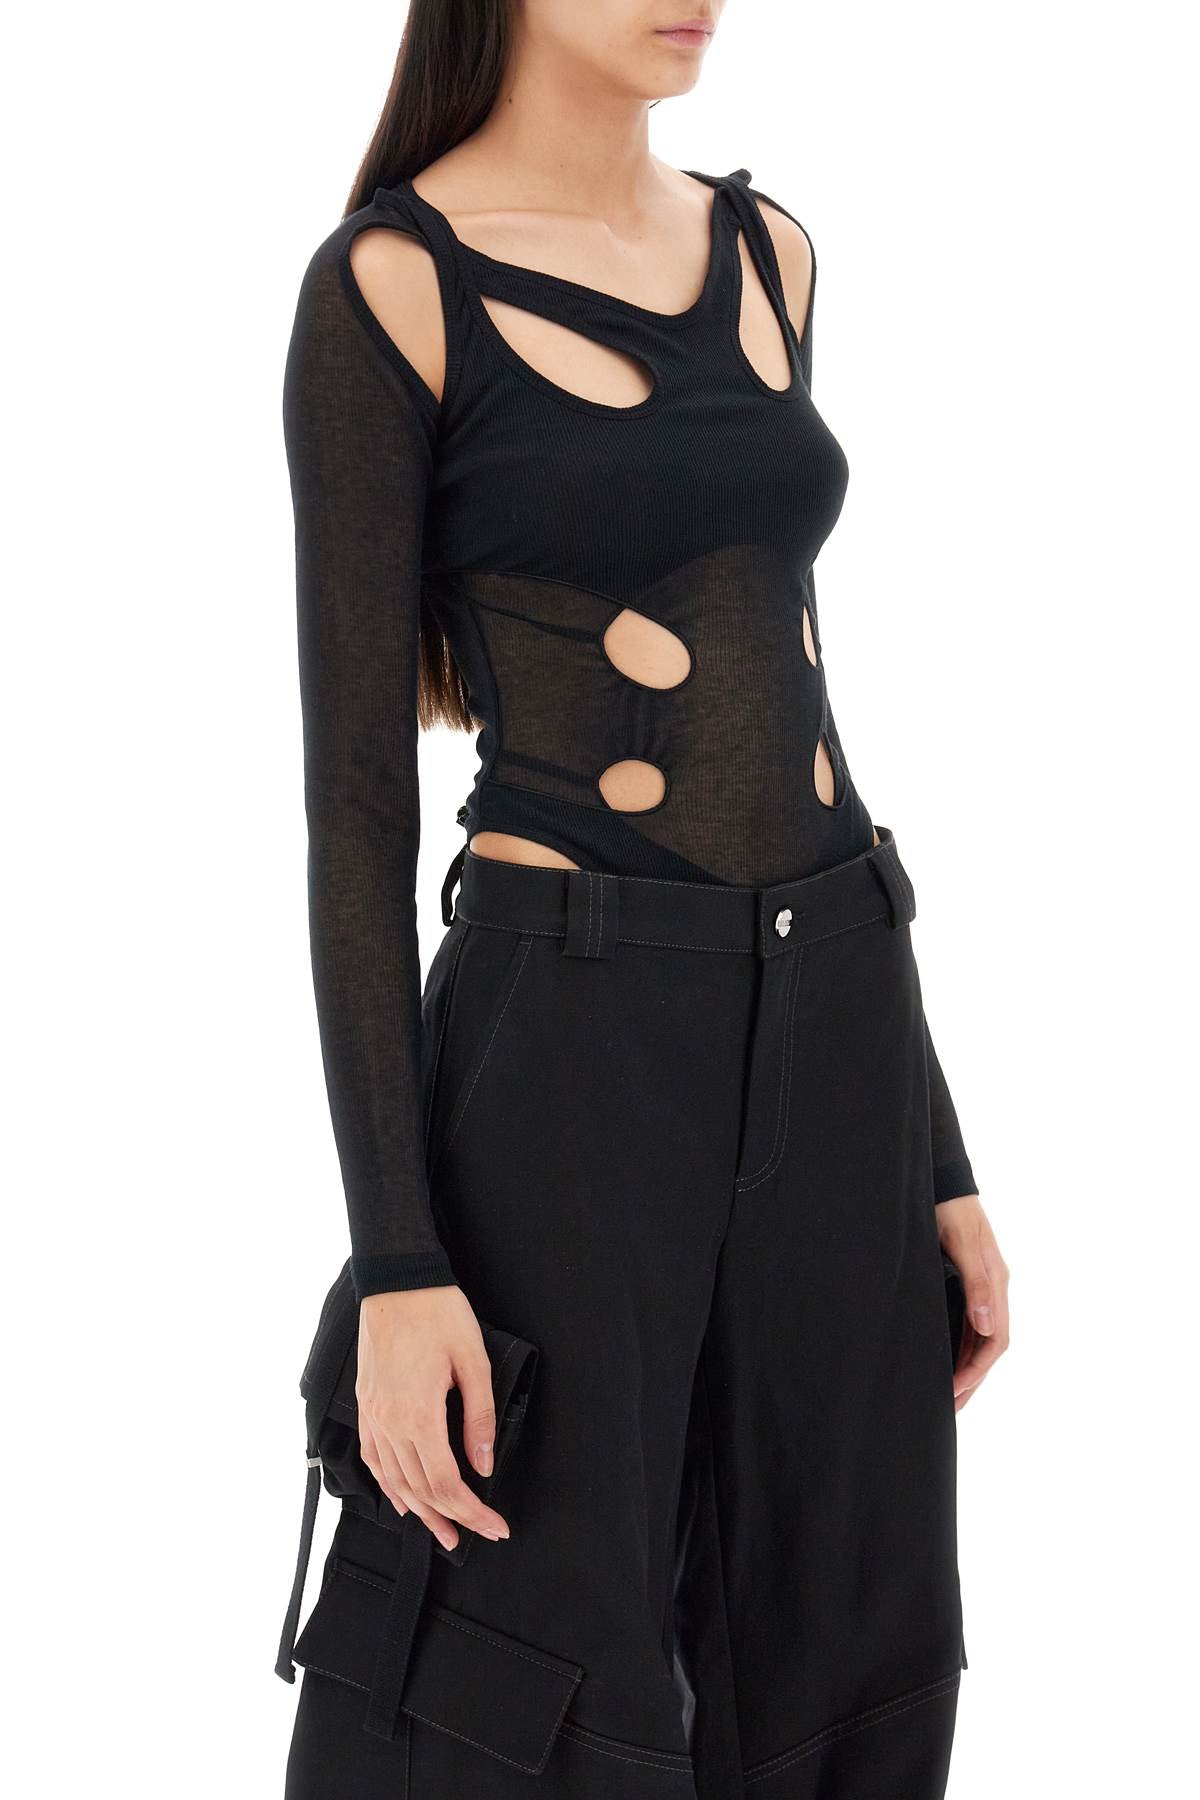 Dion lee long-sleeved bodysuit with cut-outs-1